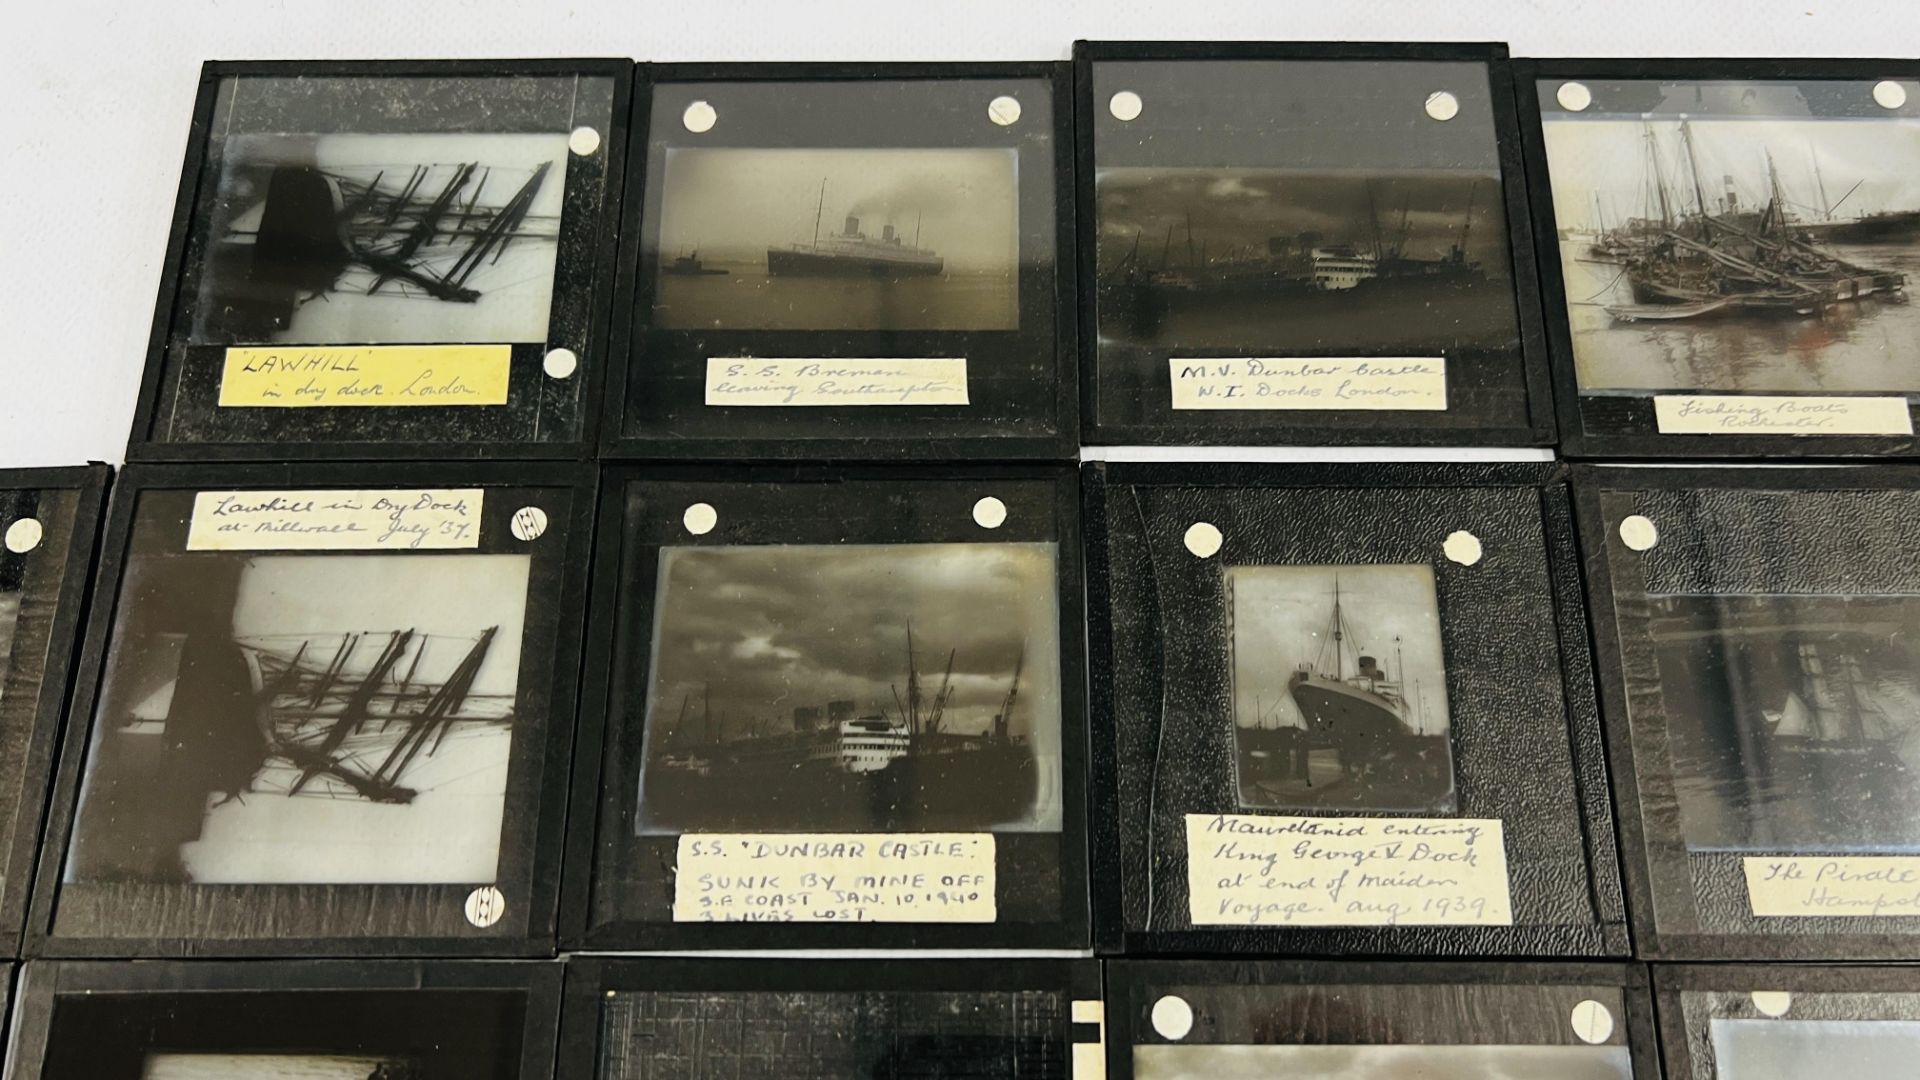 26 MARITIME LANTERN SLIDES TO INCLUDE HORNING FERRY, P & O SHATHMORO, M.V. DUNBAR CASTLE AND MORE. - Image 4 of 6